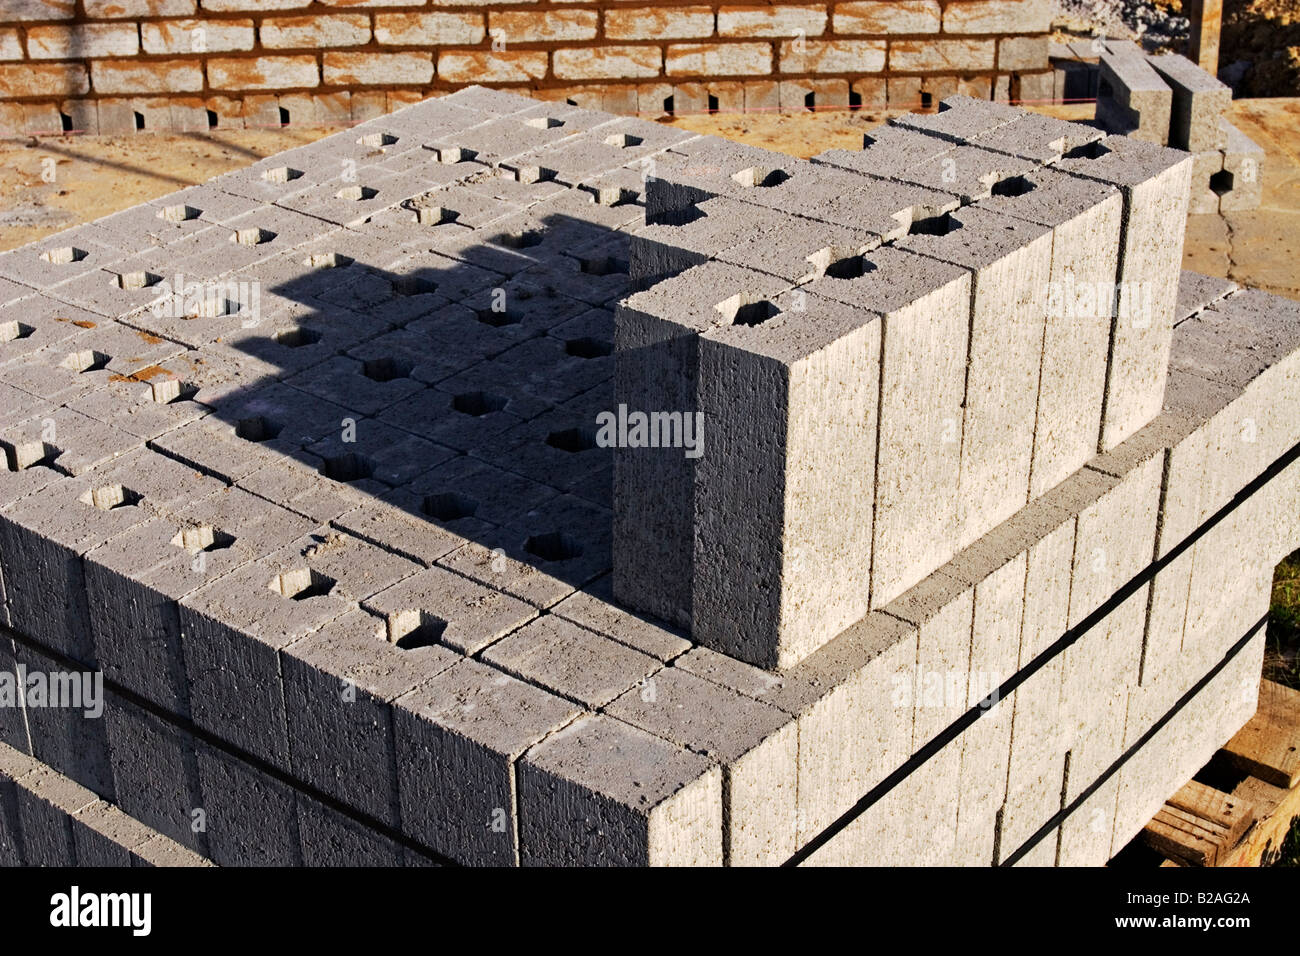 Residential Construction / A Pallet of Bricks on a building site.Melbourne Victoria Australia. Stock Photo